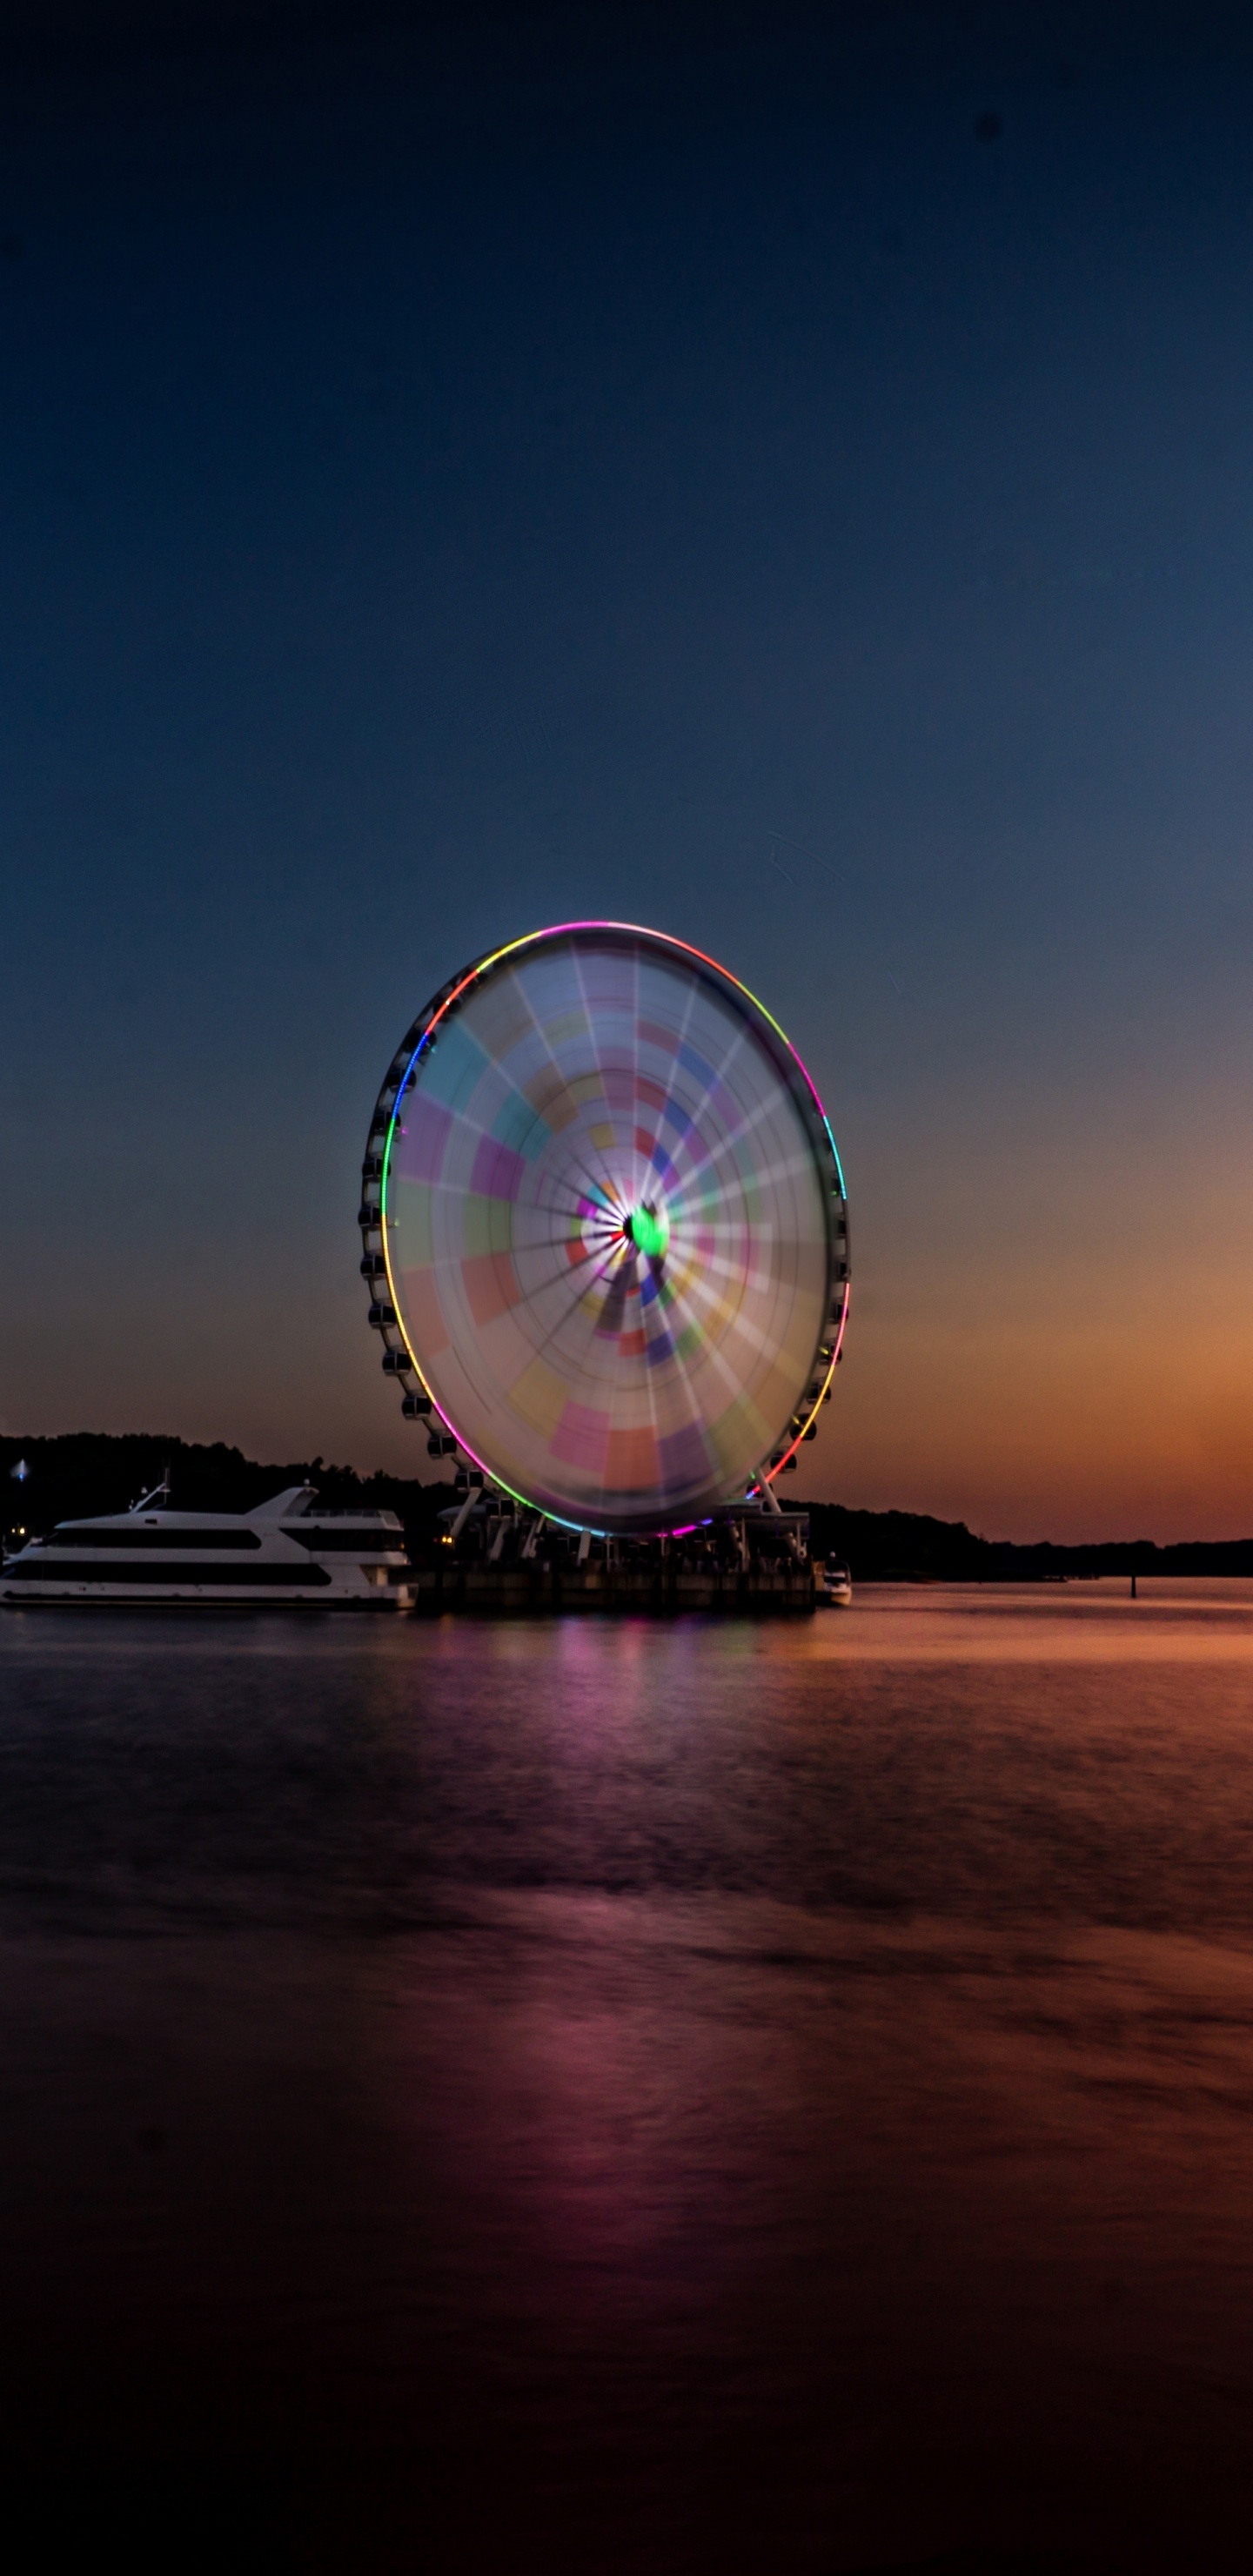 Ferris Wheel Near Body of Water During Night Time. Wallpaper in 1440x2960 Resolution